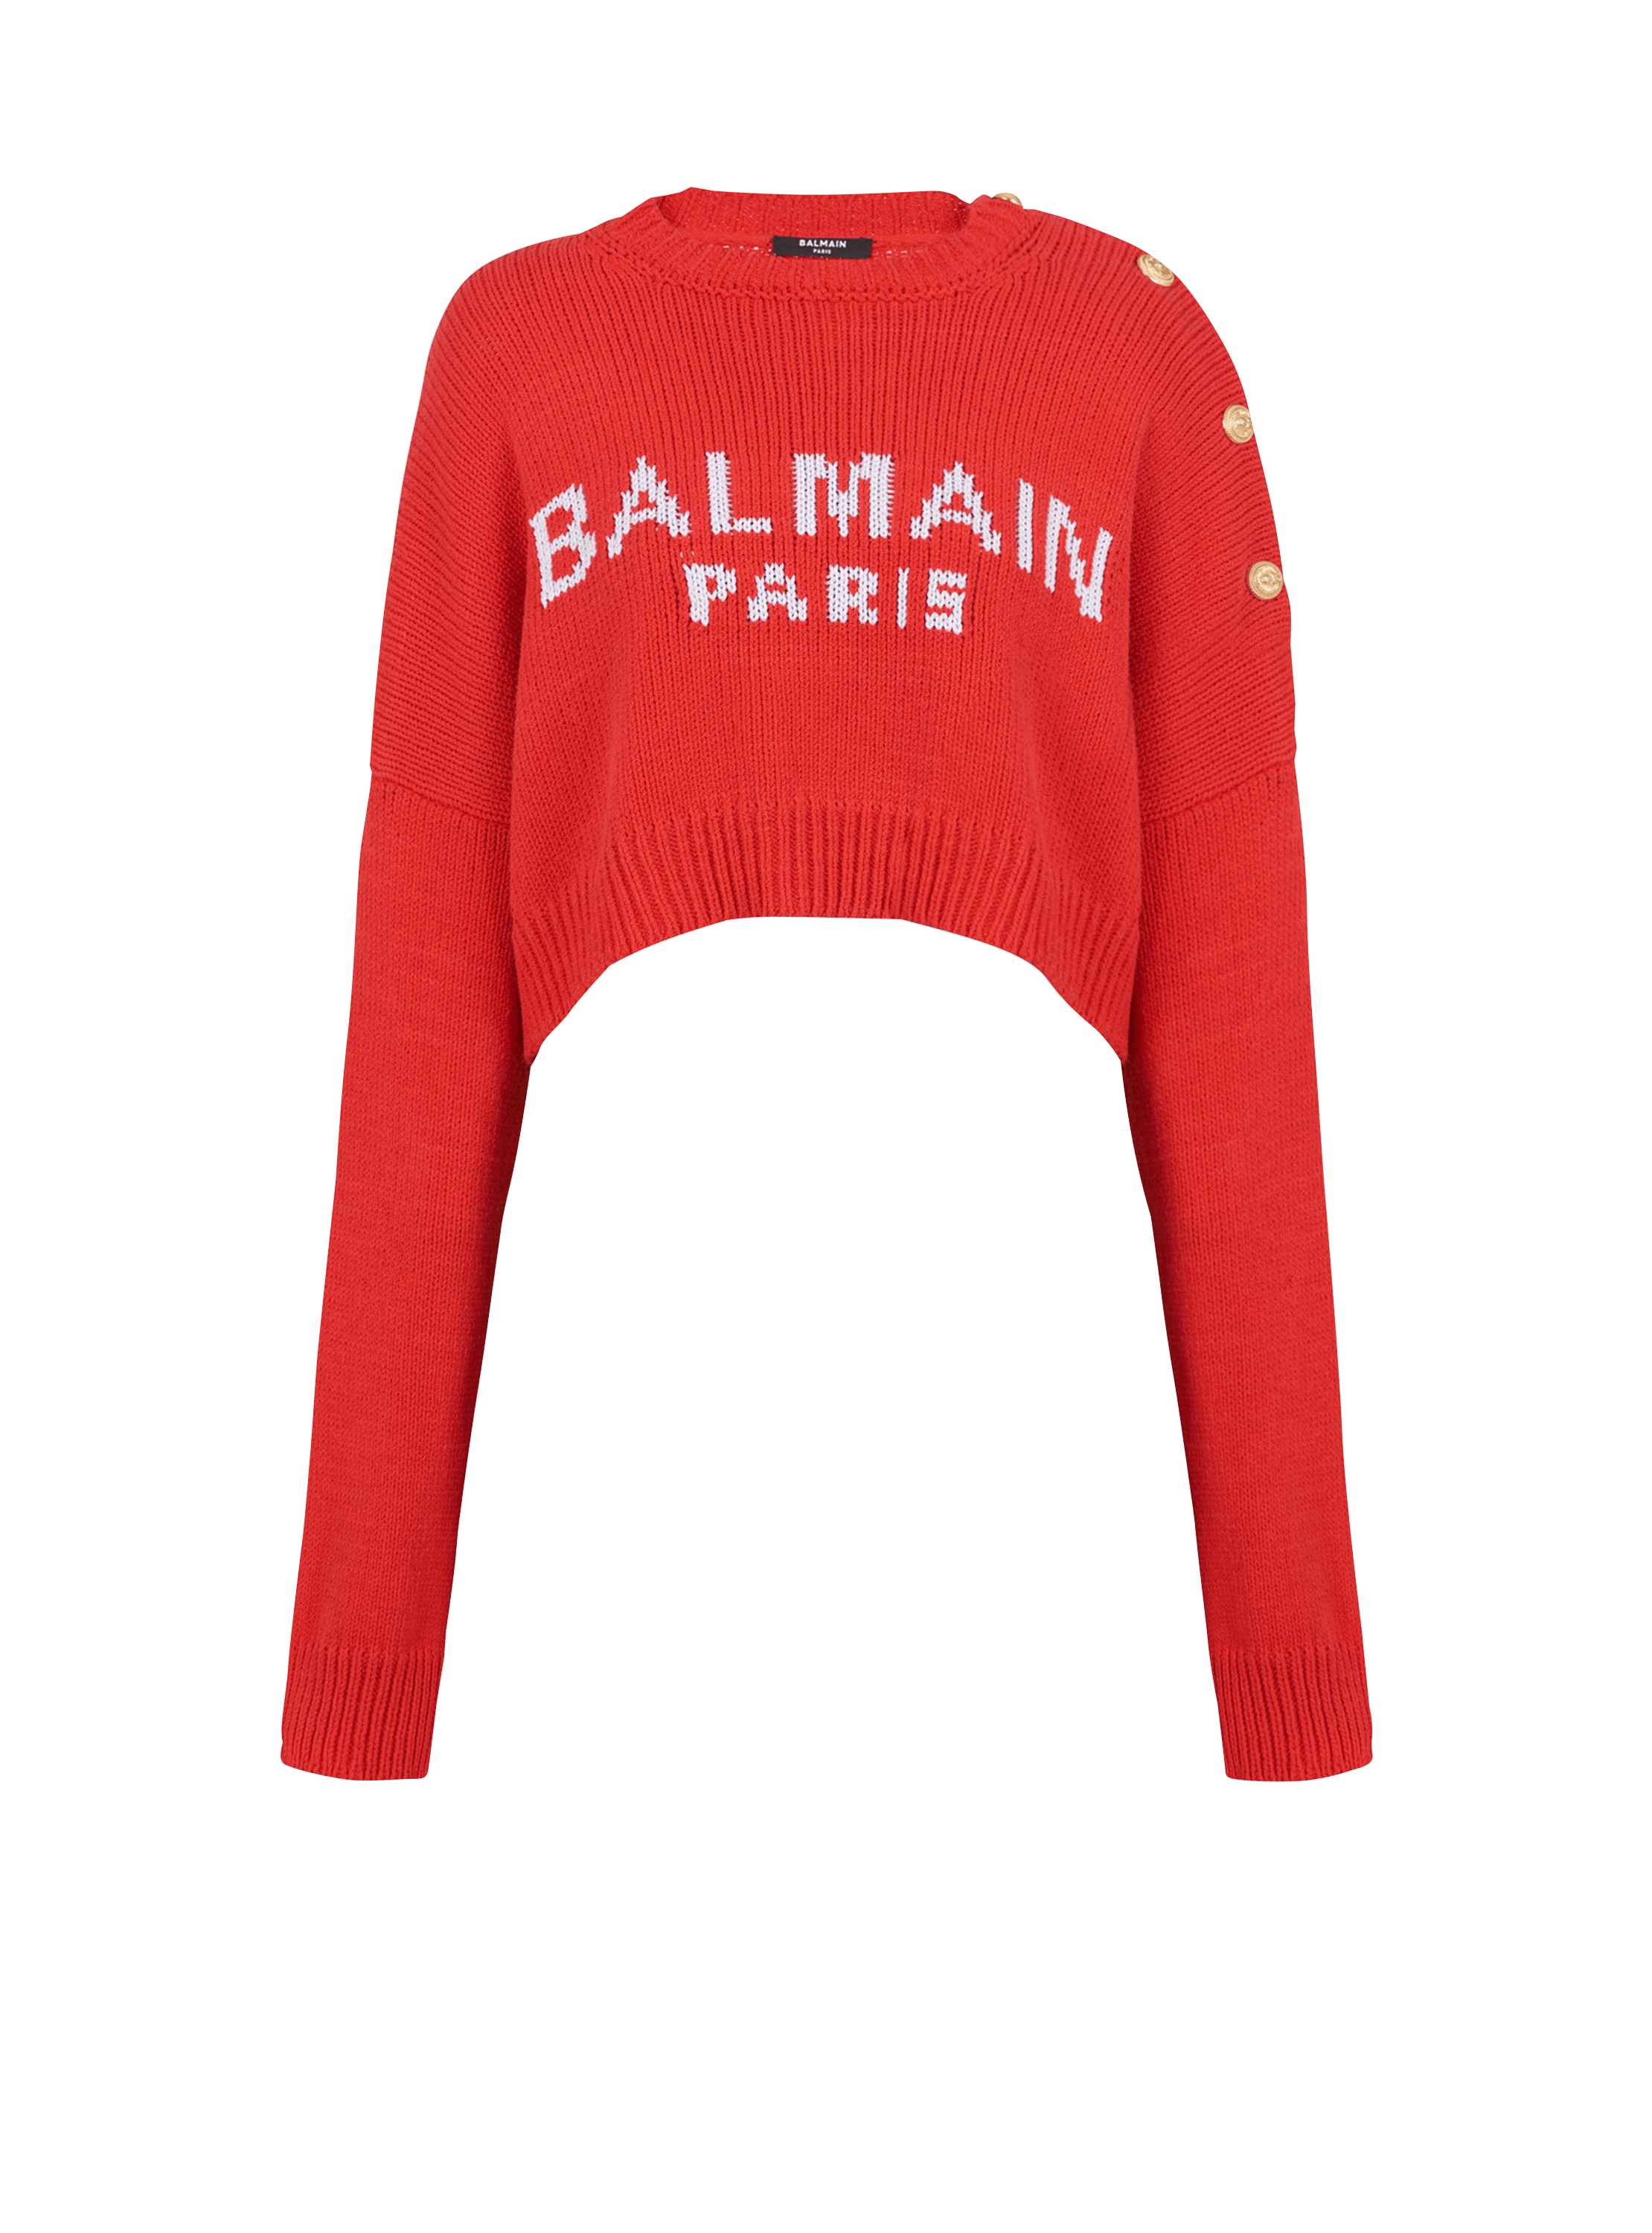 HIGH SUMMER CAPSULE - Cropped knit sweater with Balmain logo print